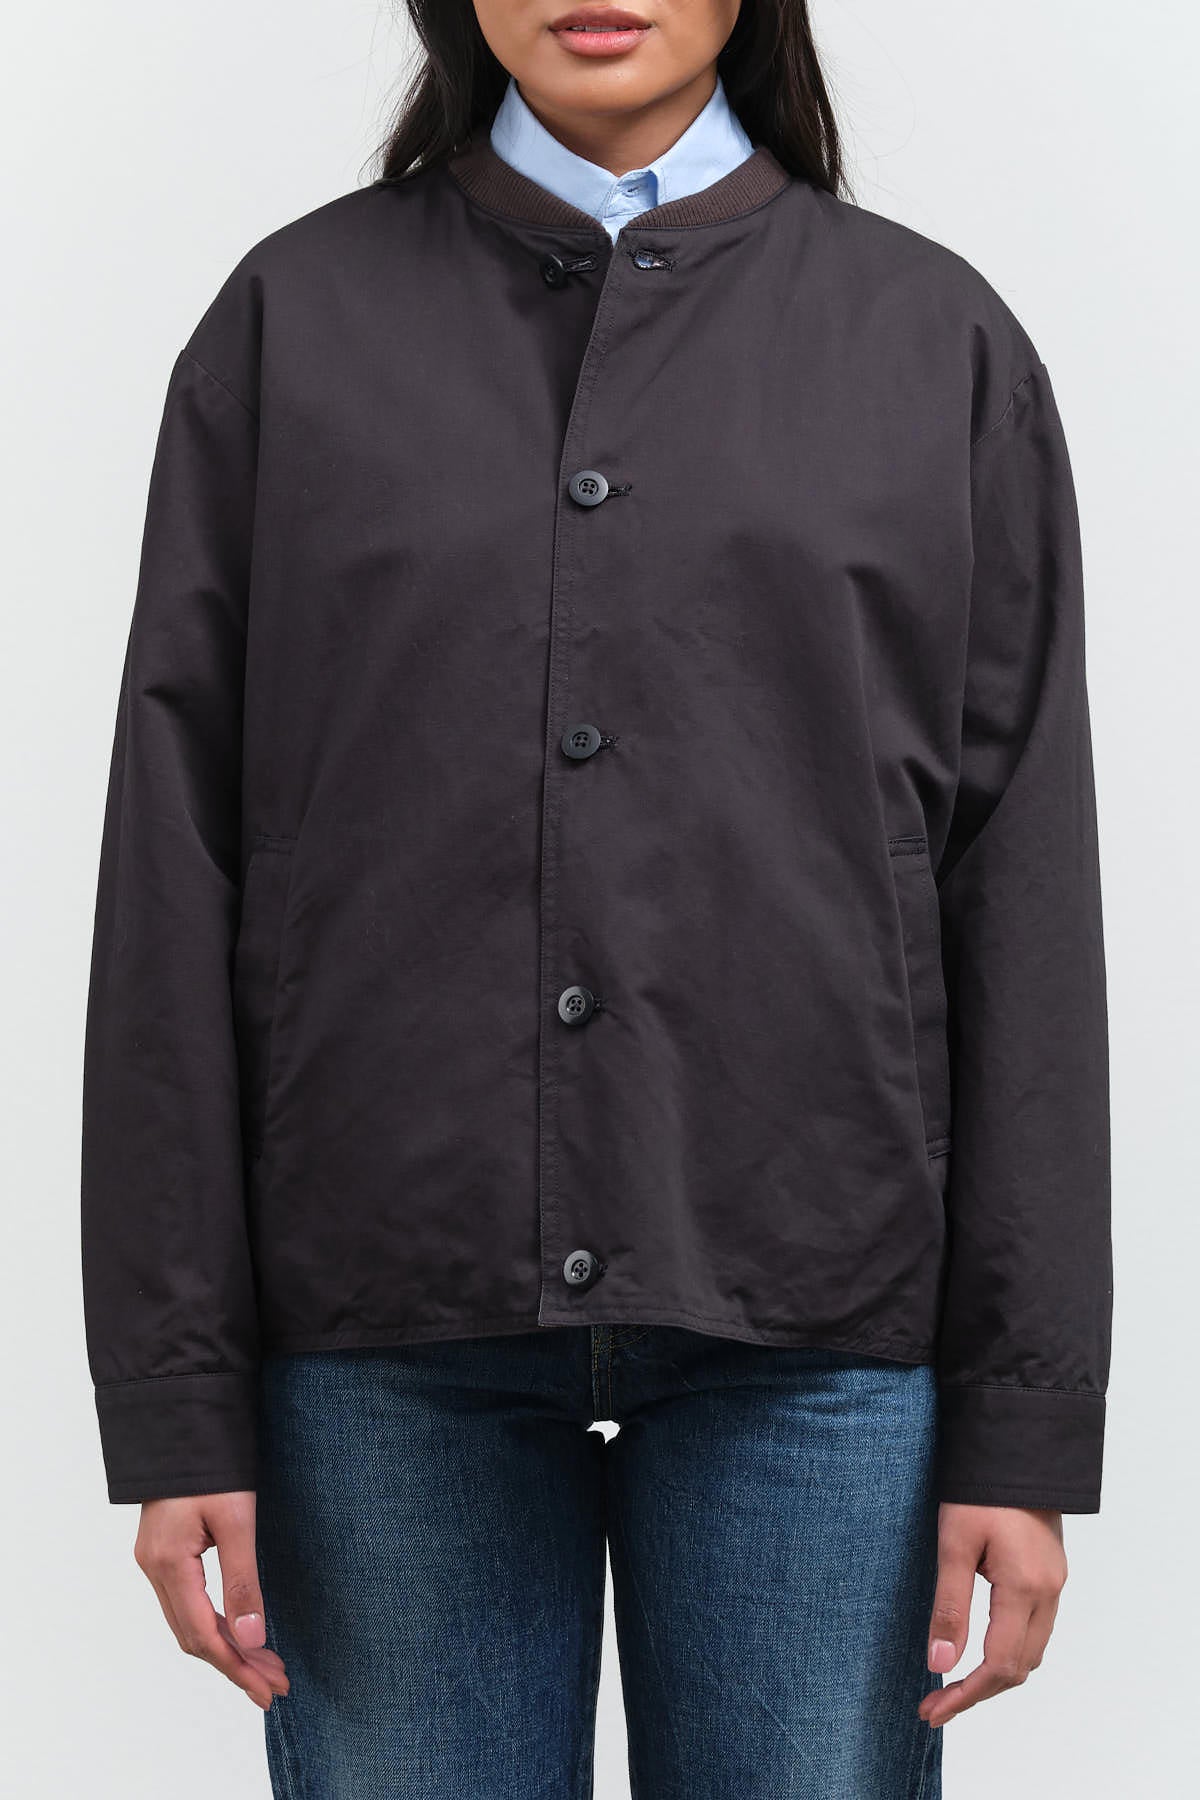 Front buttoned up view of Unisex Reversible Driving Jacket